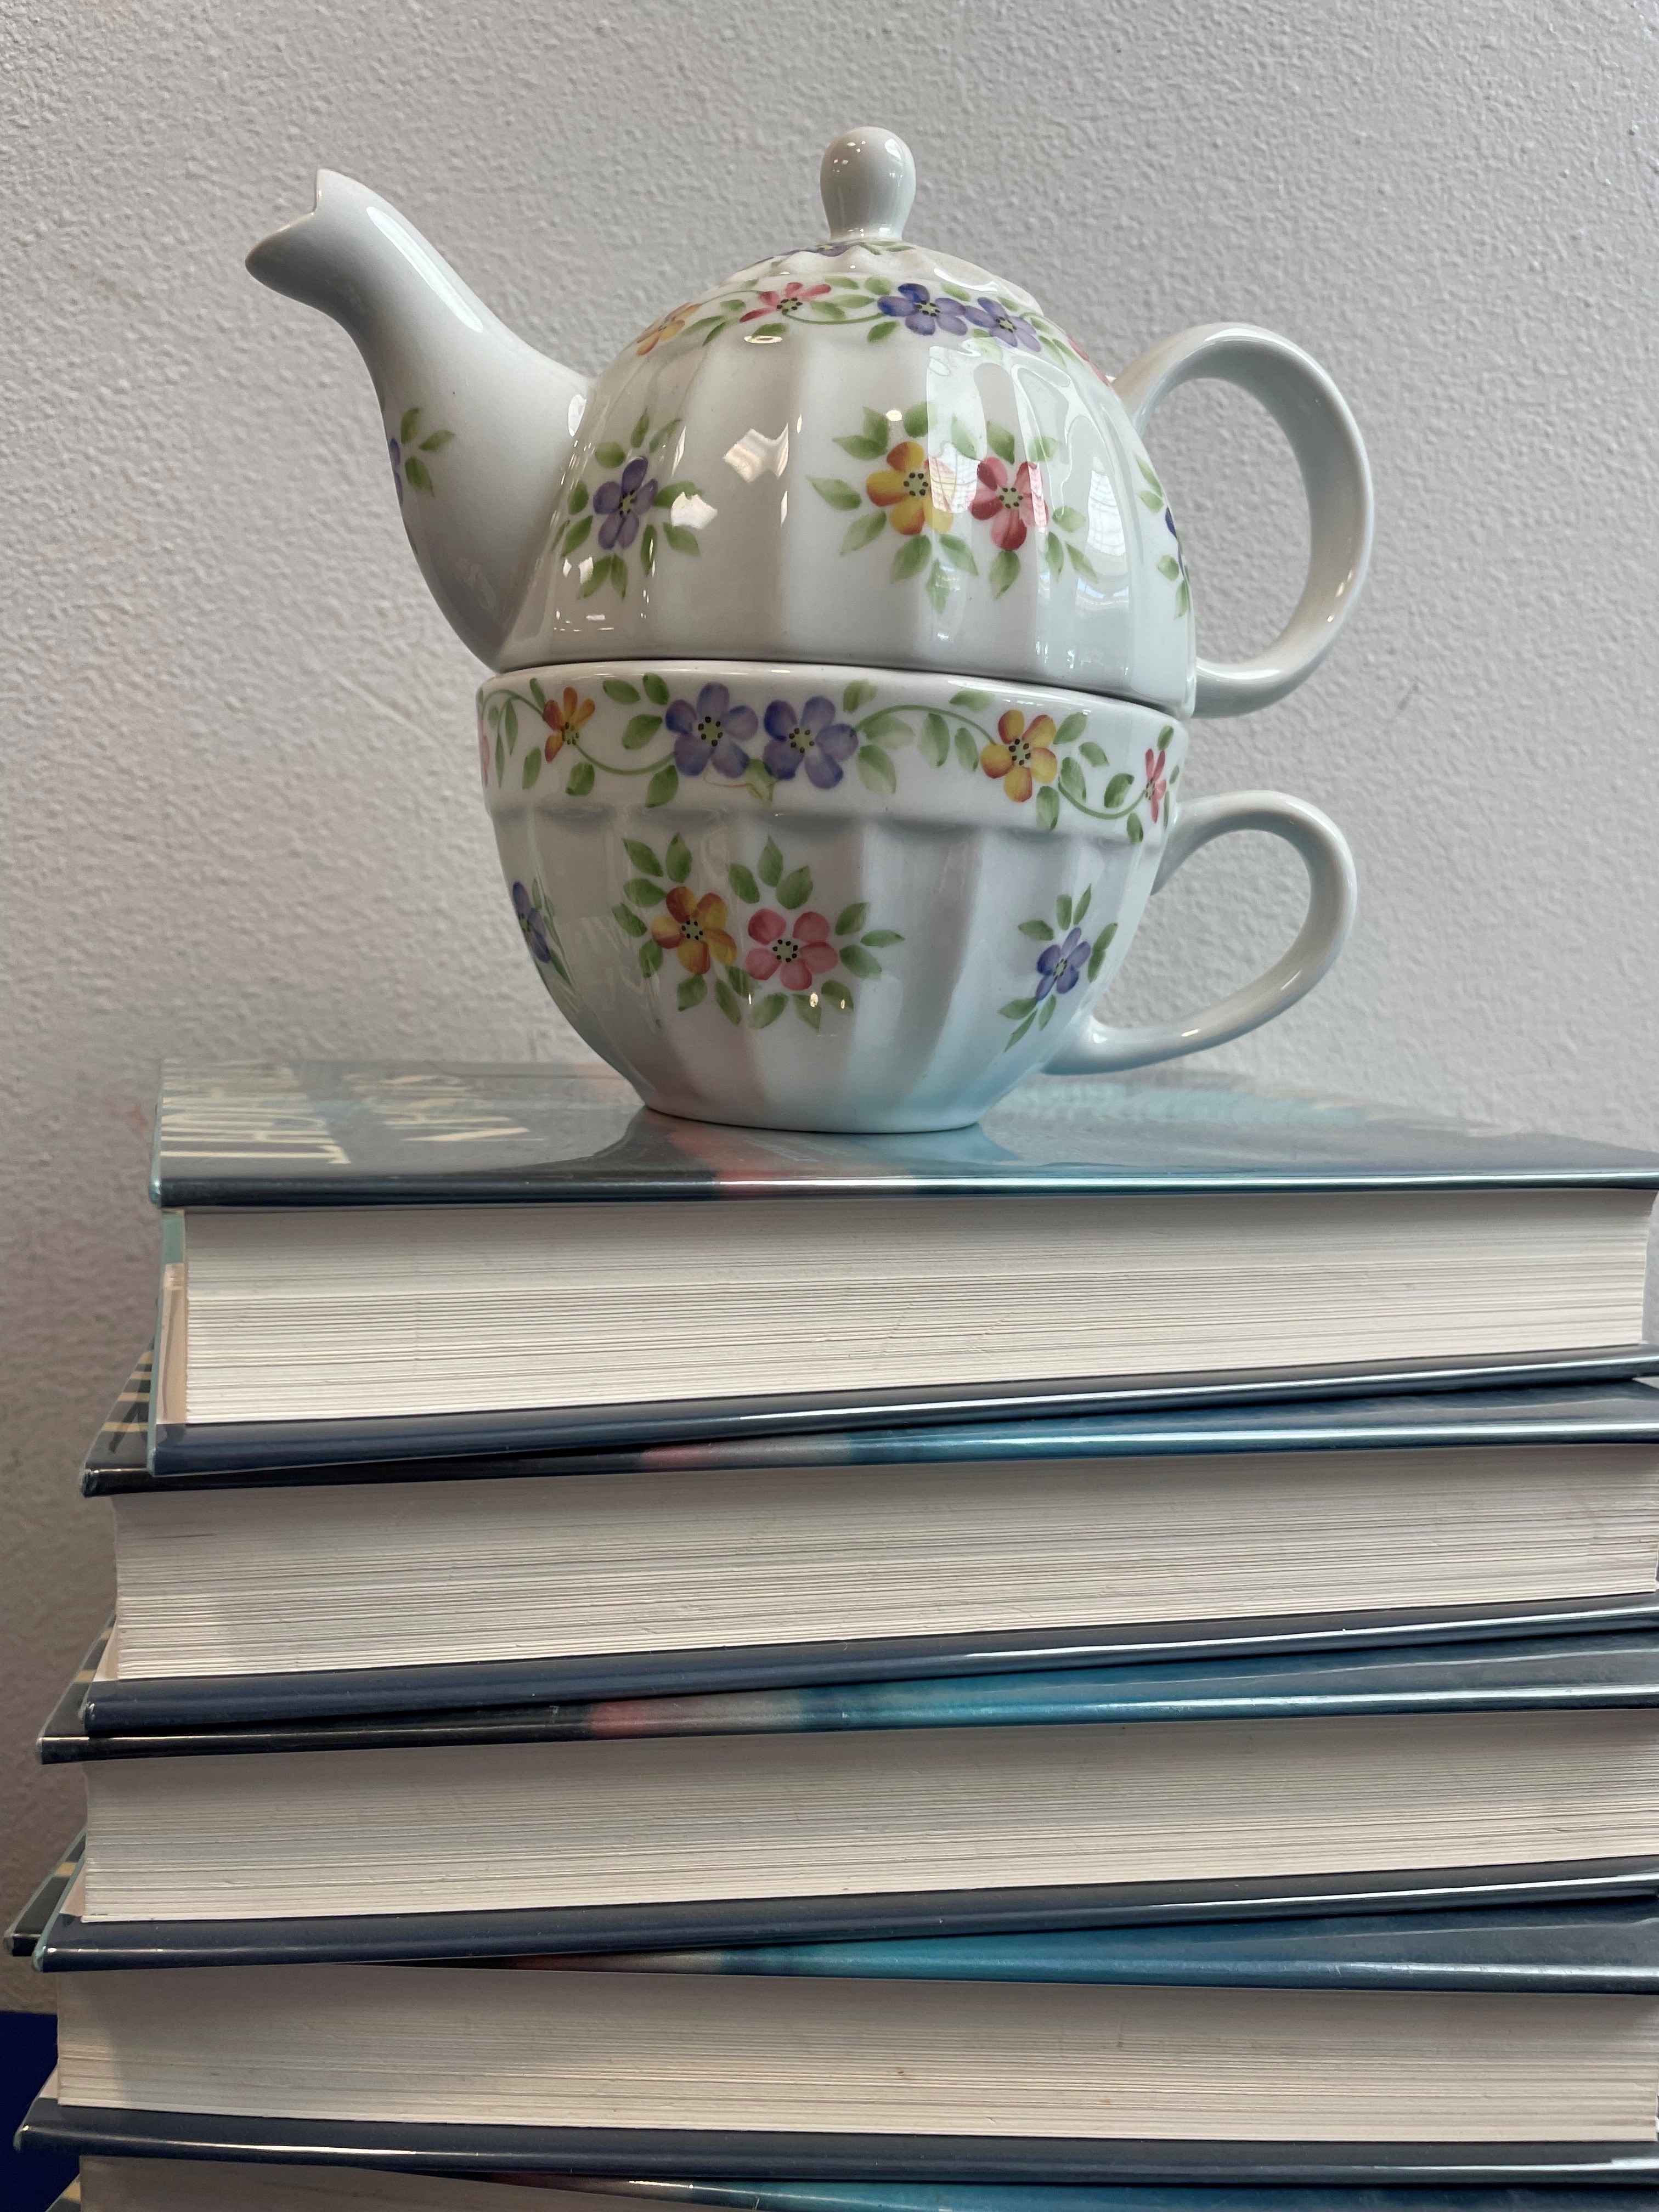 Teapot and teacup sitting on top of a stack of books.